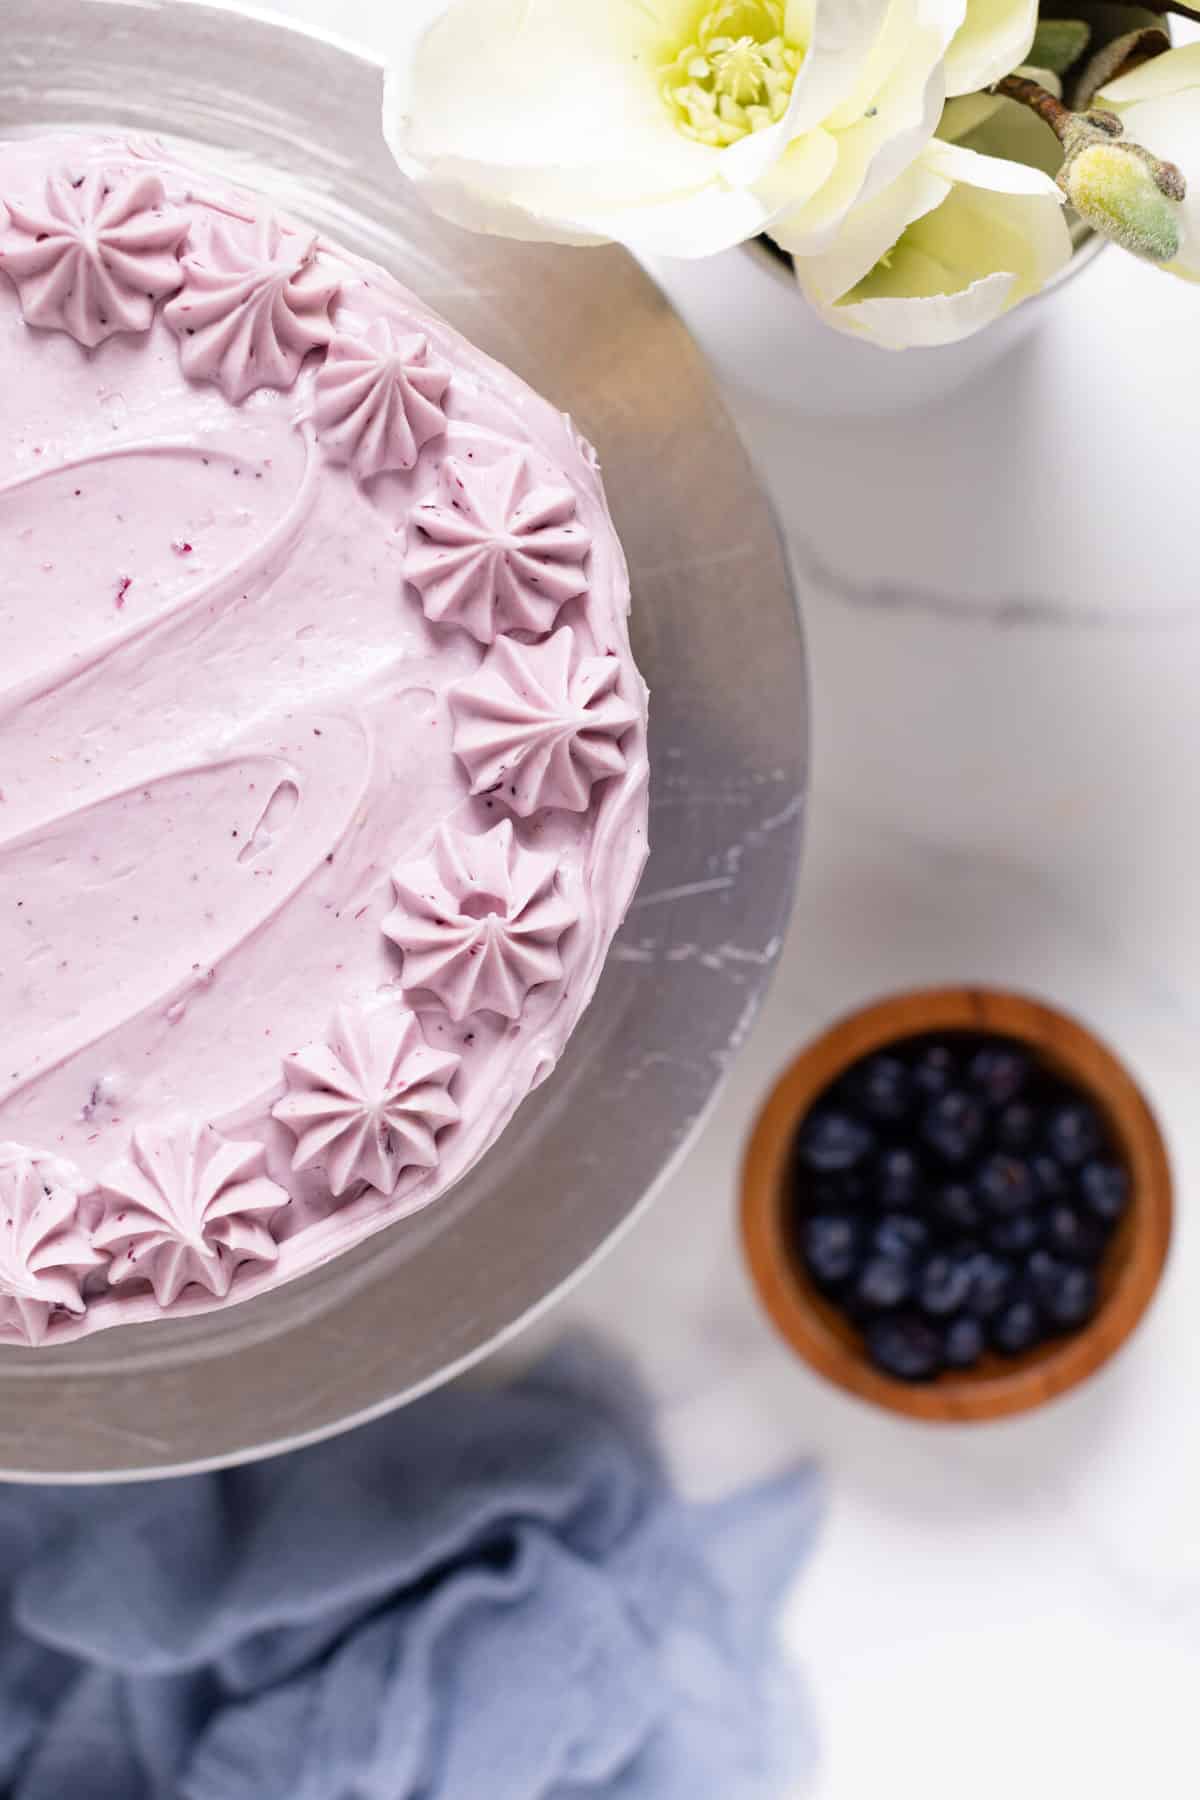 Blueberry Oatmeal Cake with Cream Cheese Frosting on a cake stand.